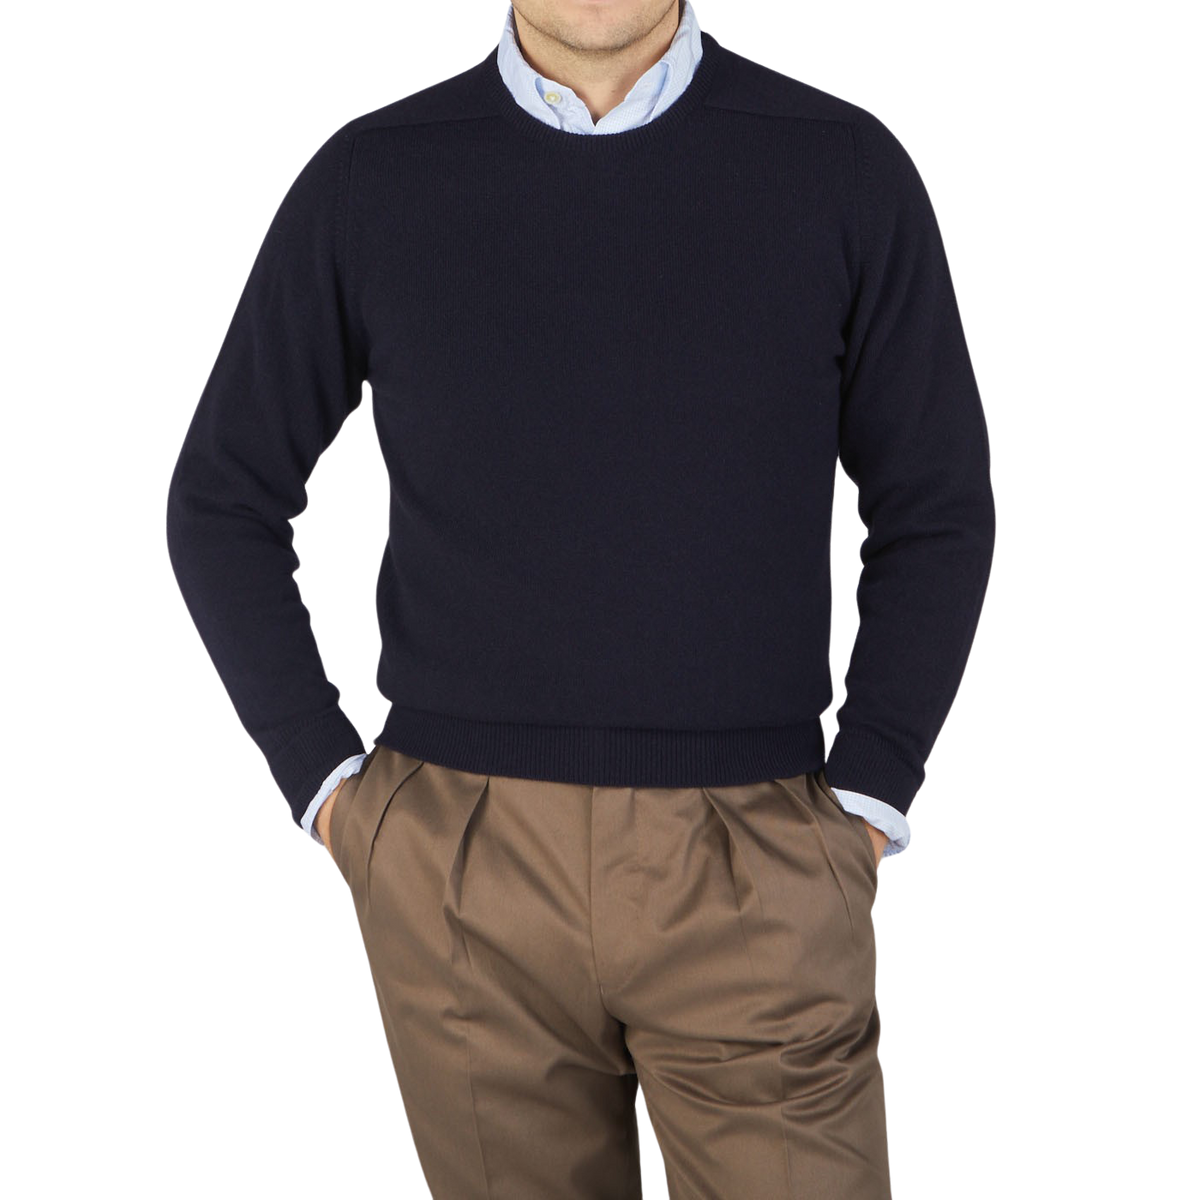 A man wearing a William Lockie Scottish Navy Crew Neck Cashmere Sweater and brown pants.